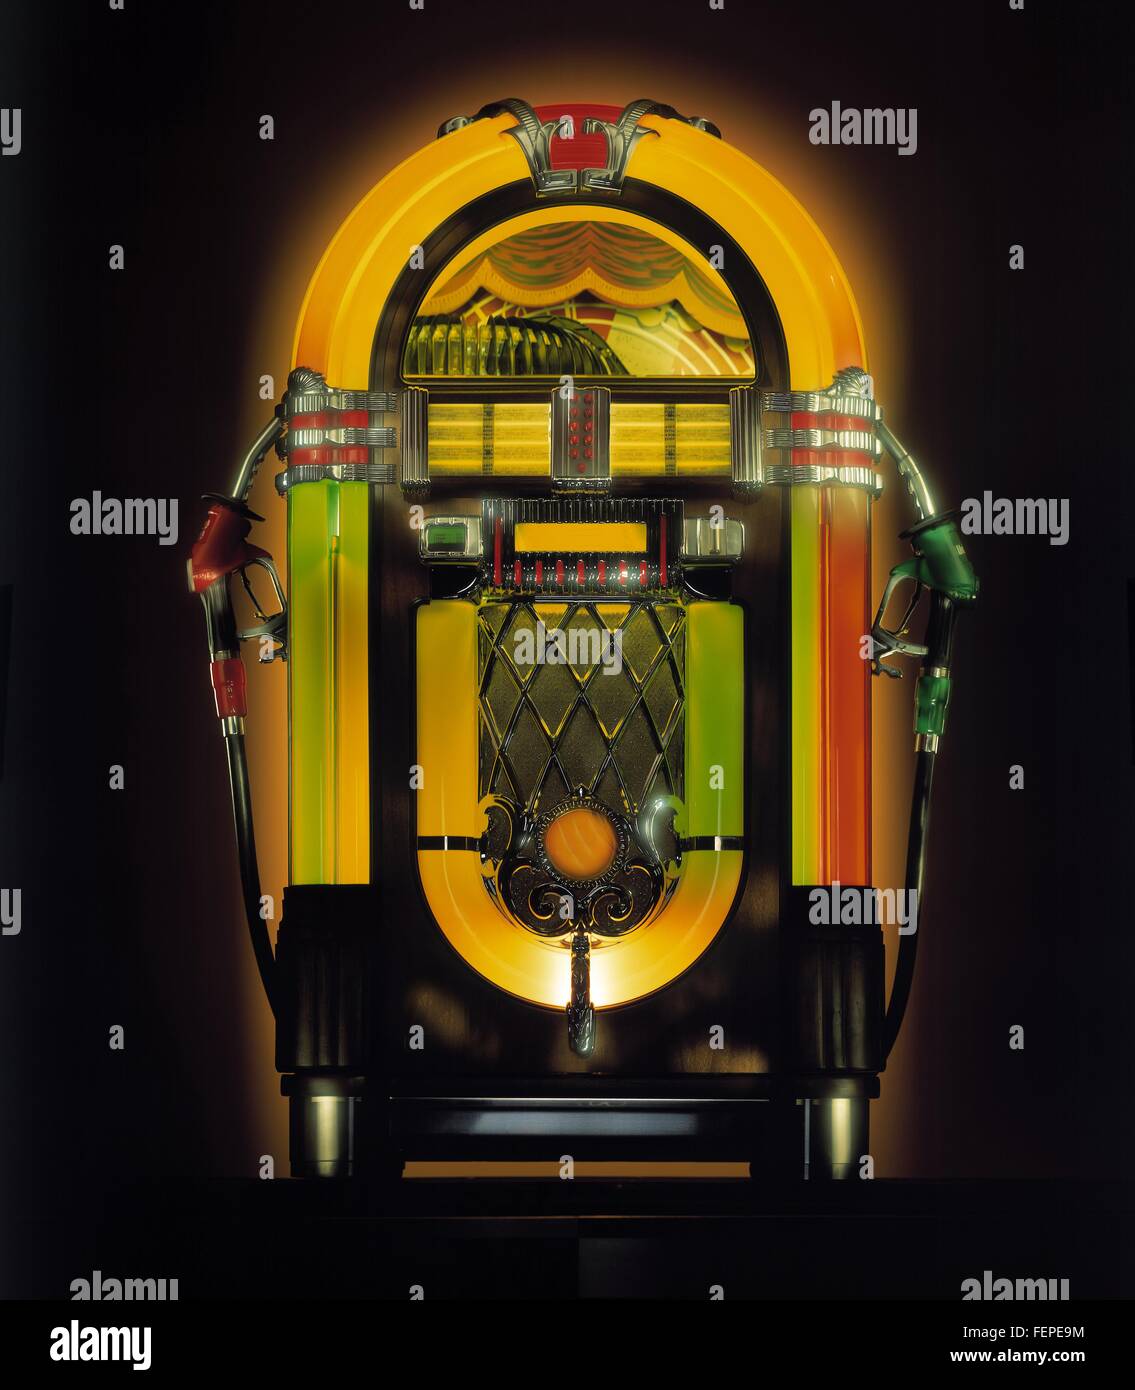 Illuminated vintage jukebox with attached gas pump nozzles Stock Photo